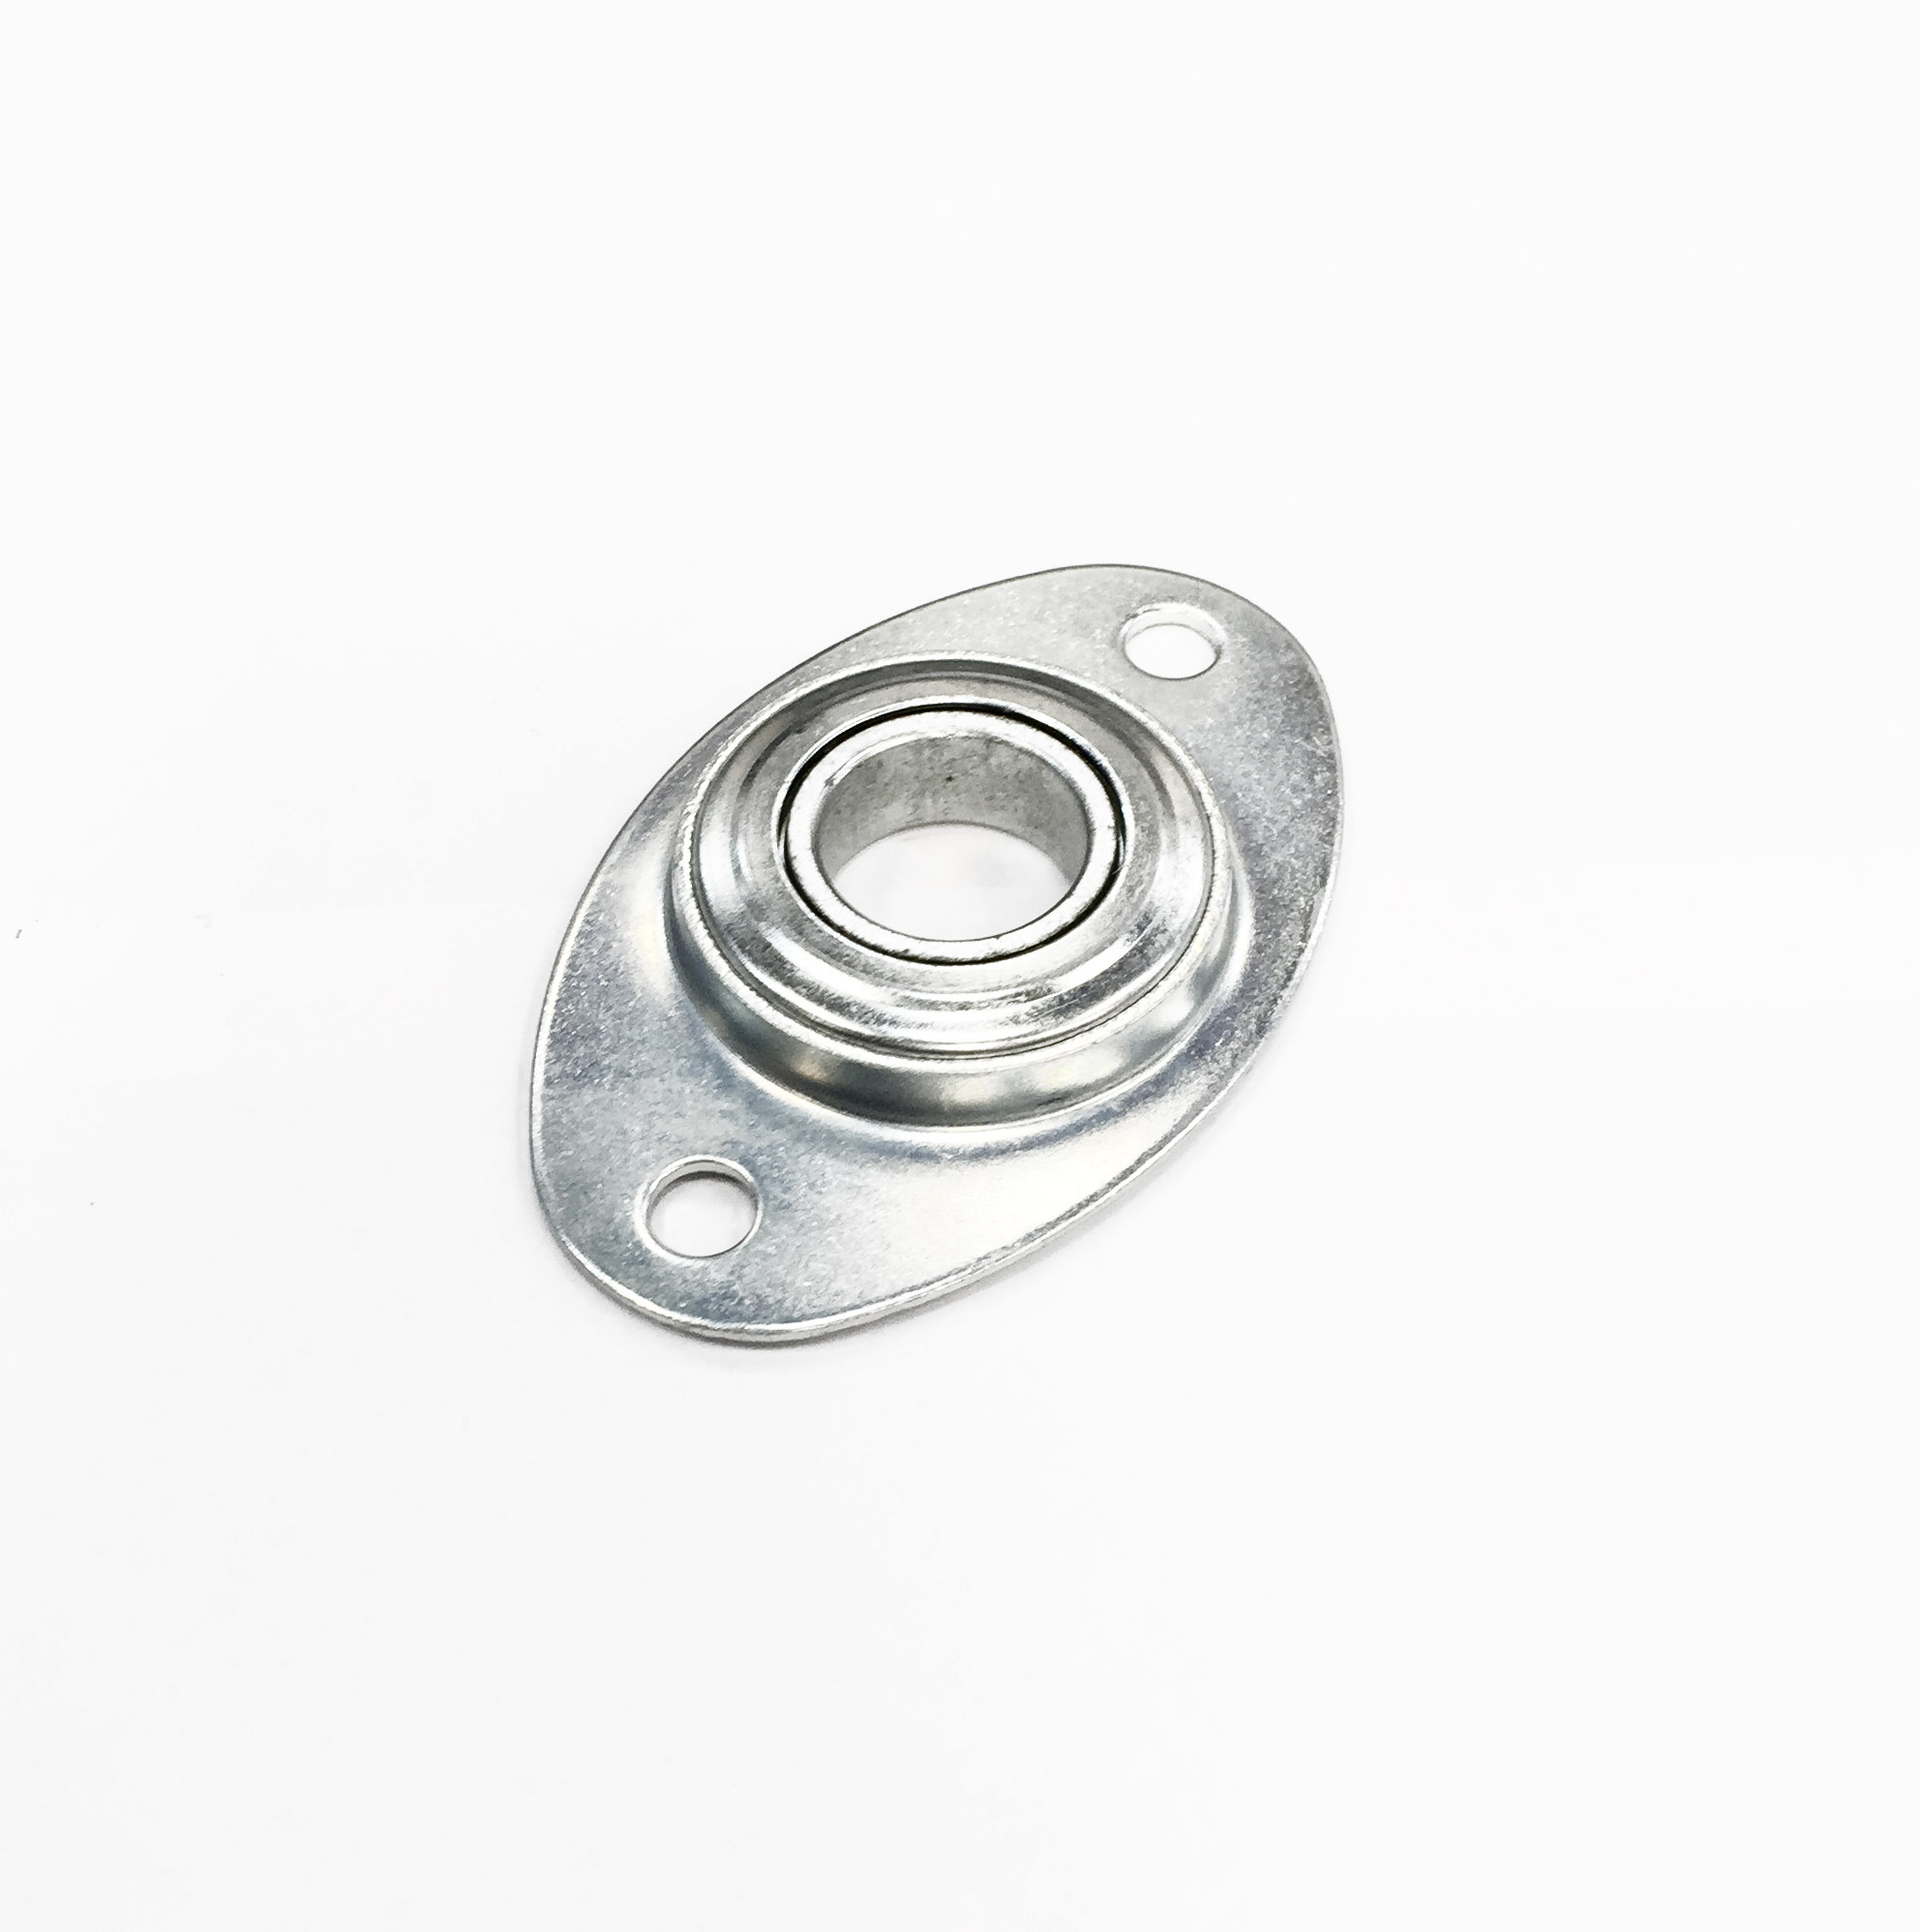 G13026 27 Bearing with Retainer 25.4mm